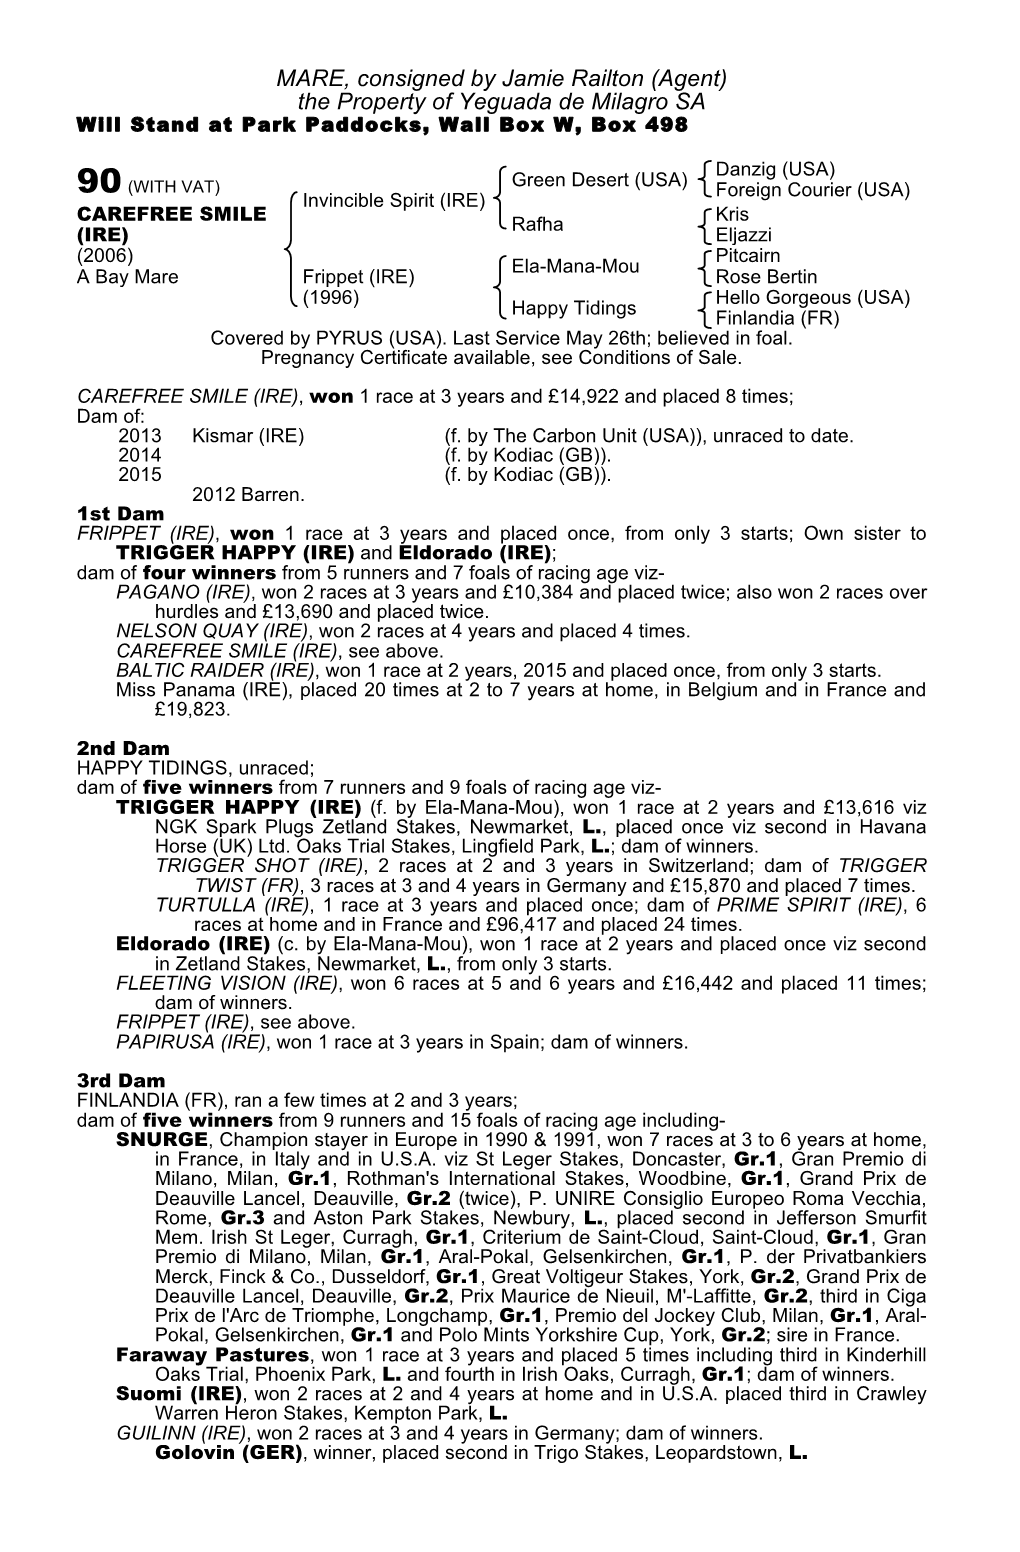 MARE, Consigned by Jamie Railton (Agent) the Property of Yeguada De Milagro SA Will Stand at Park Paddocks, Wall Box W, Box 498